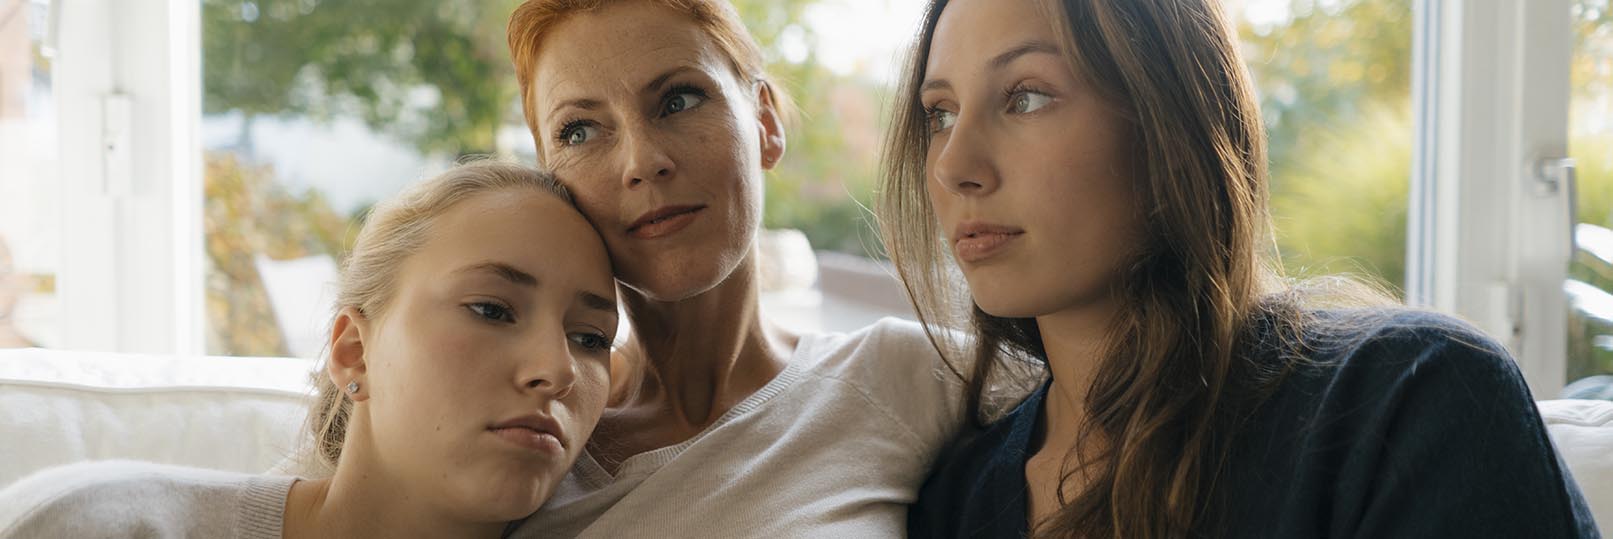 woman looking somber with her daughters, sitting on a couch